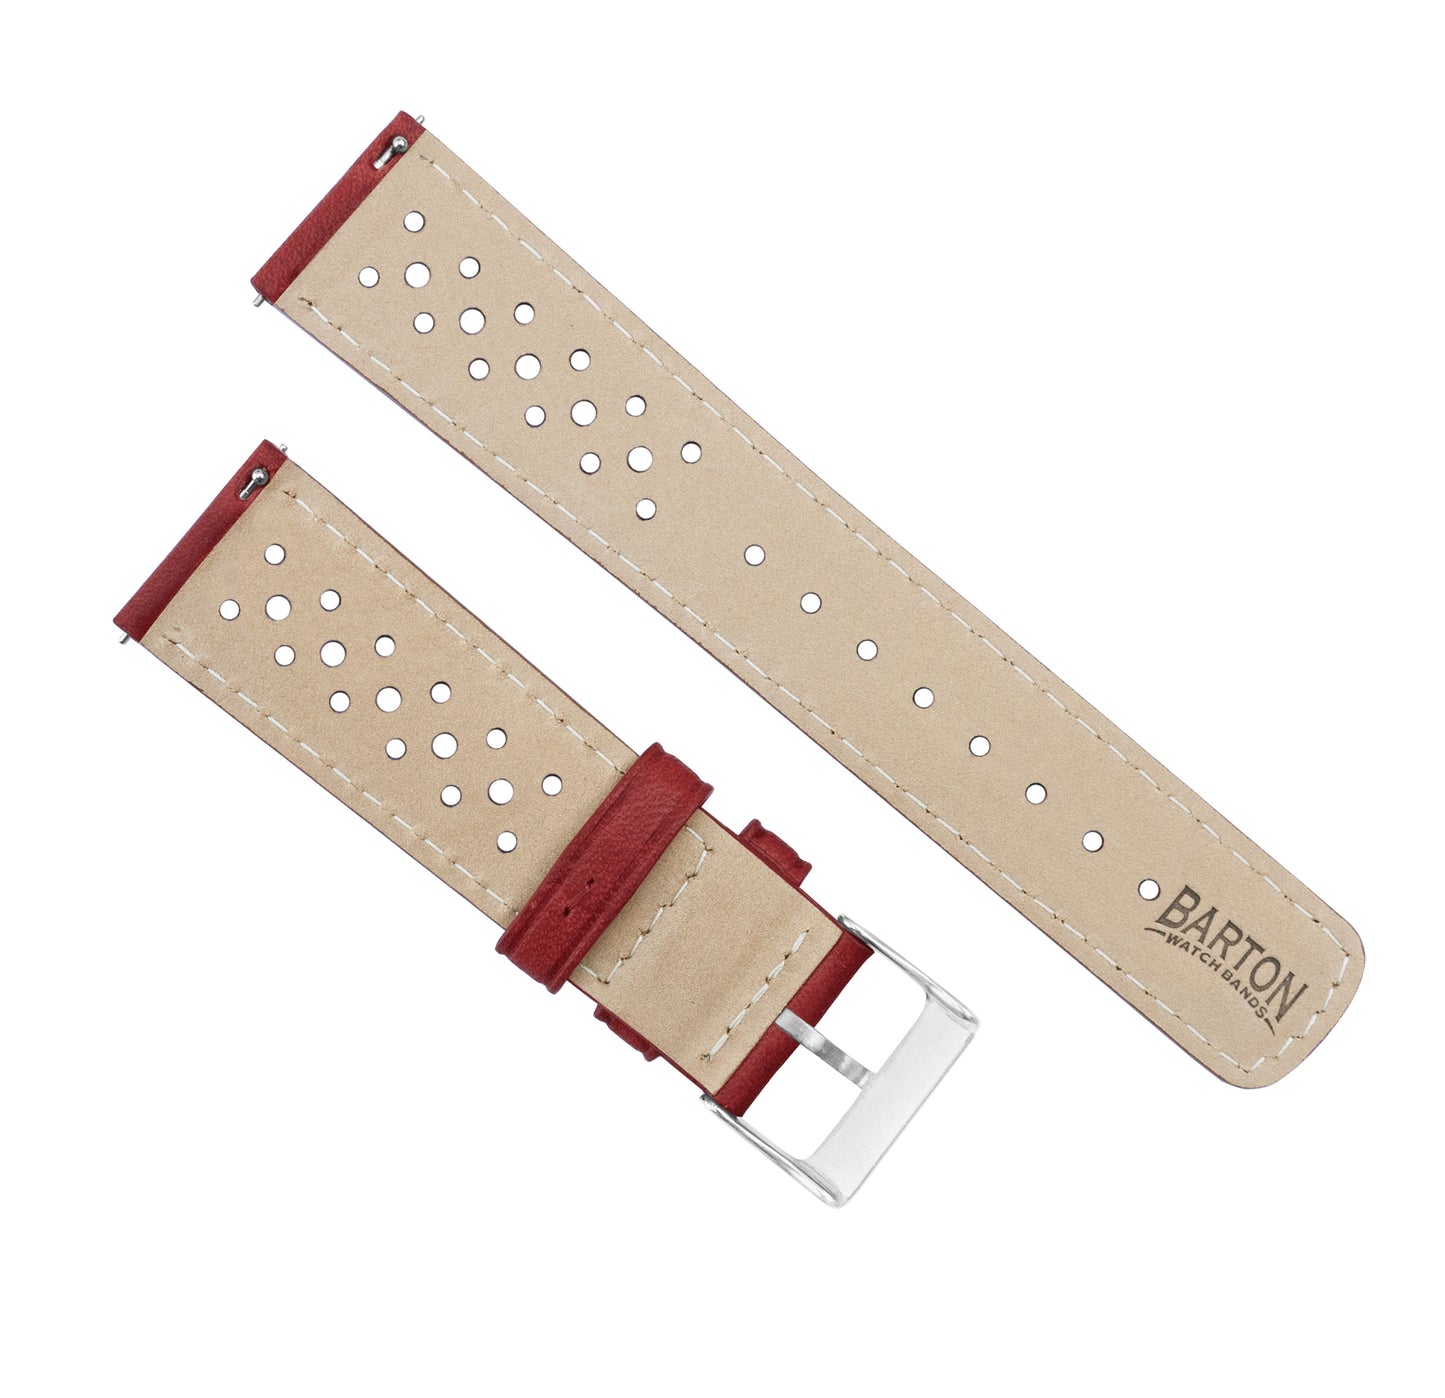 Fossil Gen 5 Racing Horween Leather Crimson Red Linen Stitch Watch Band